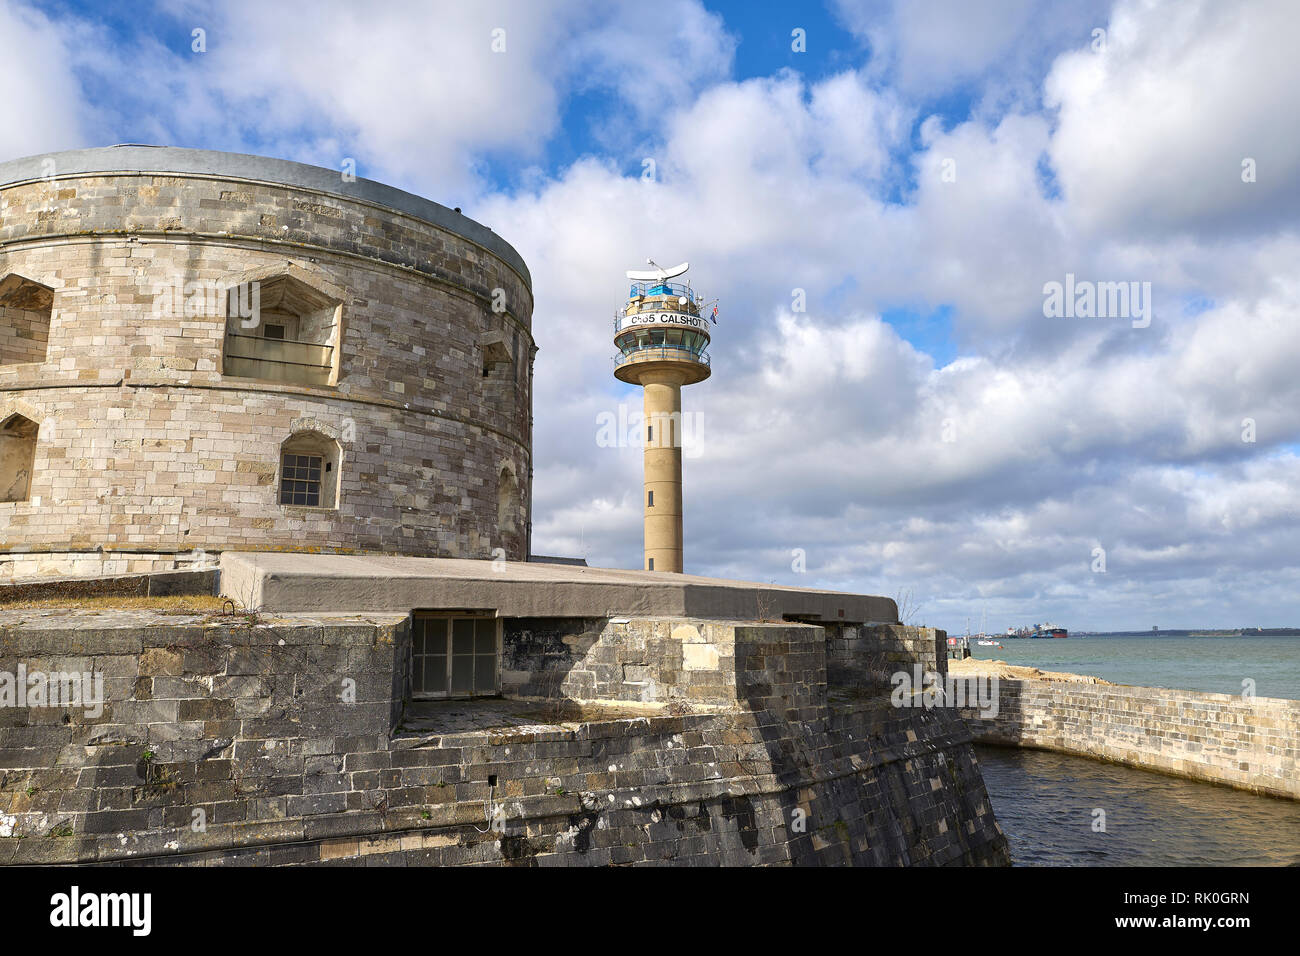 Calshot Castle, First Built By Henry VIII Between 1539 And 1540 To Protect The Solent And Southampton Water, Calshot Tower Lookout Station Behind. Stock Photo